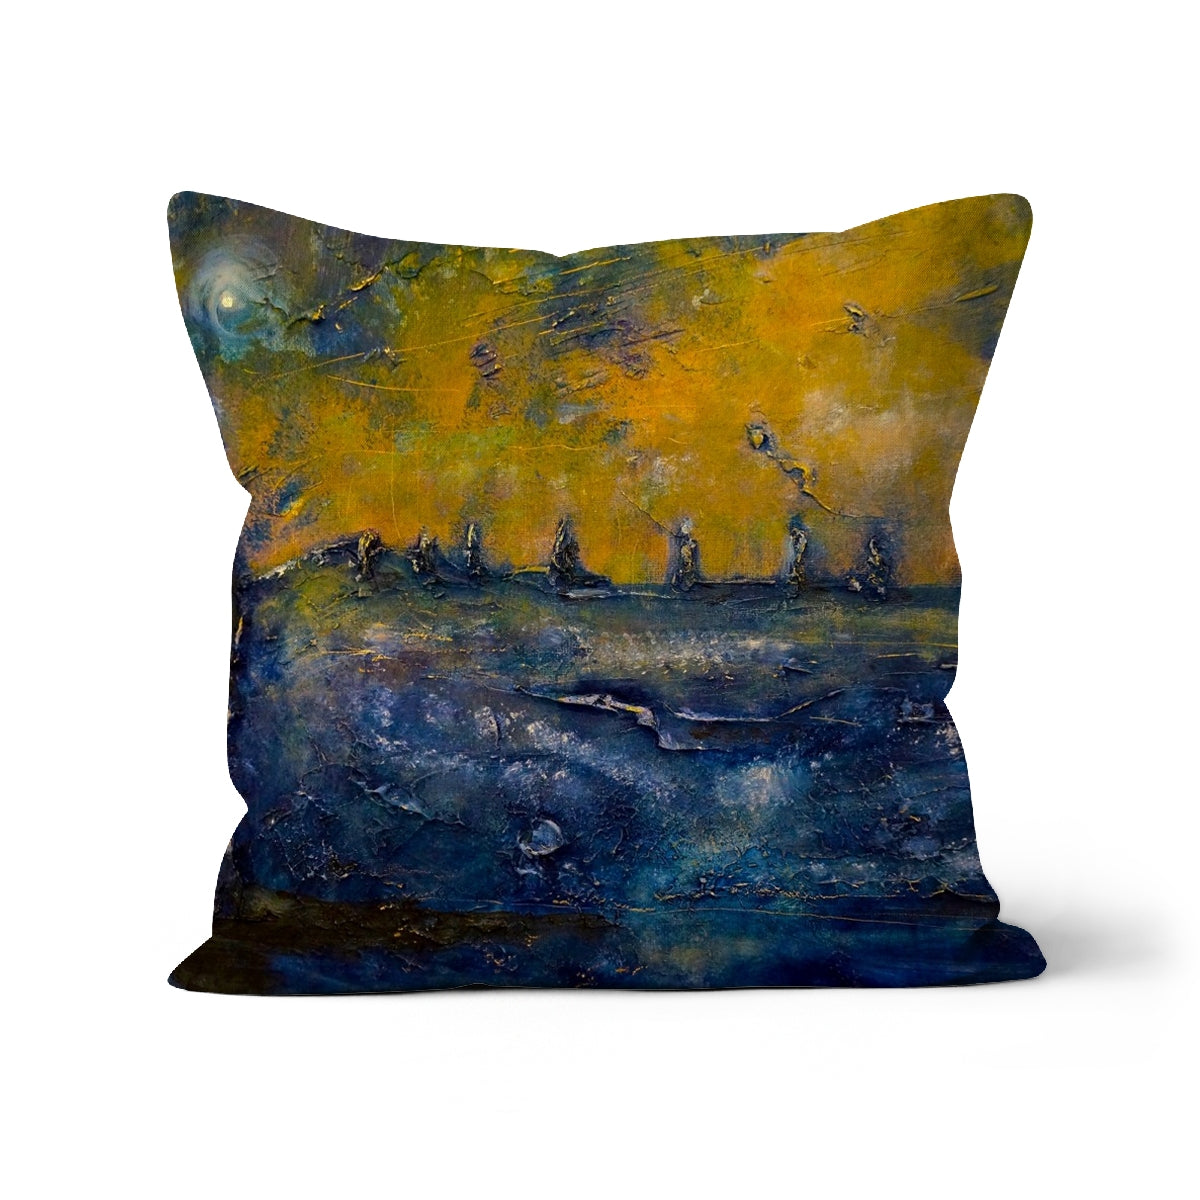 Brodgar Moonlight Orkney Art Gifts Cushion-Cushions-Orkney Art Gallery-Faux Suede-22"x22"-Paintings, Prints, Homeware, Art Gifts From Scotland By Scottish Artist Kevin Hunter